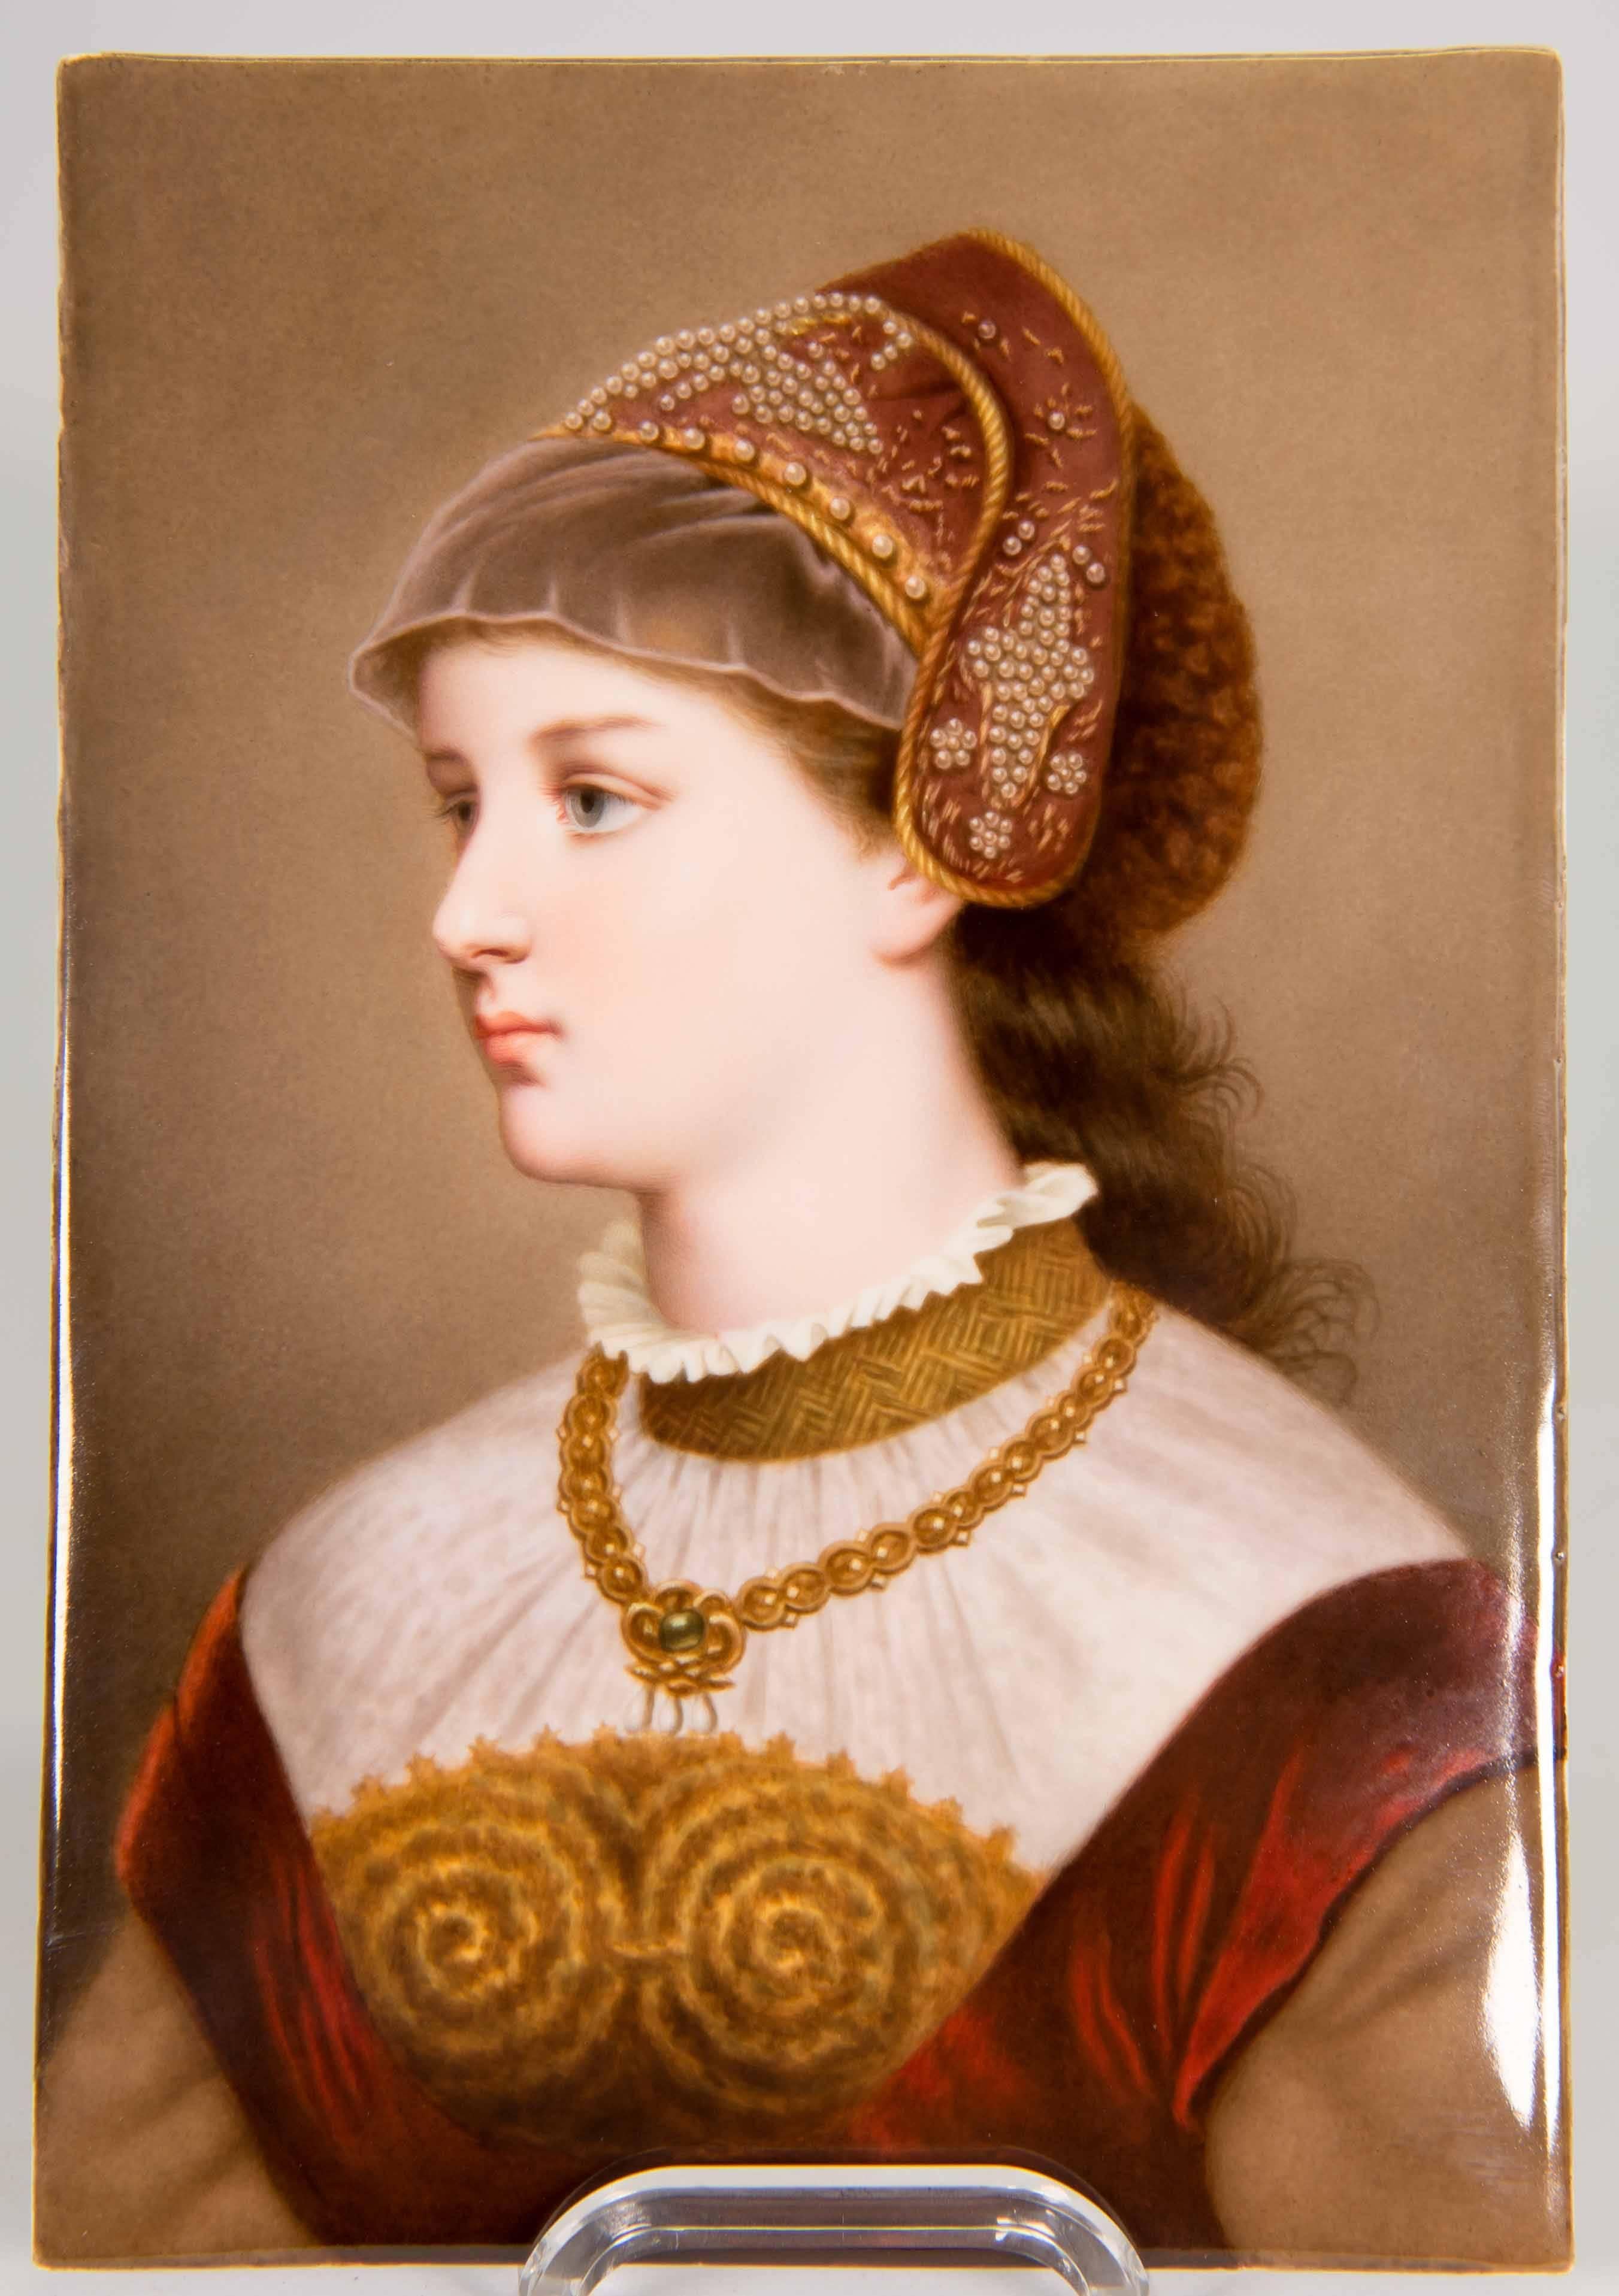 Late 19th century made porcelain plaque signed KPM on back, portrait of lady. 
Very fine detail and mint condition.
    